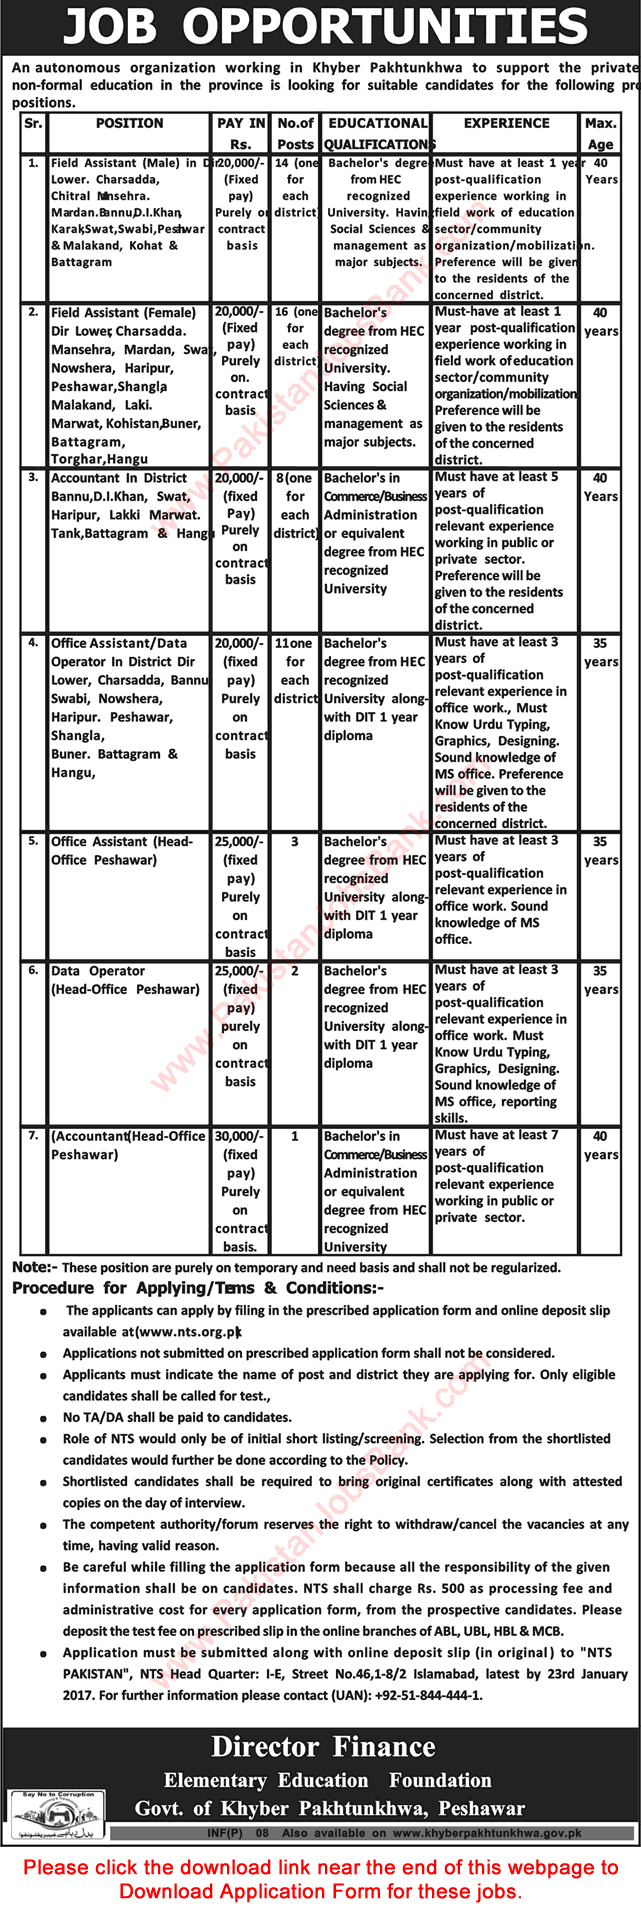 Elementary Education Foundation KPK Jobs 2017 NTS Application Form Field Assistants, Office Assistants & Others Latest